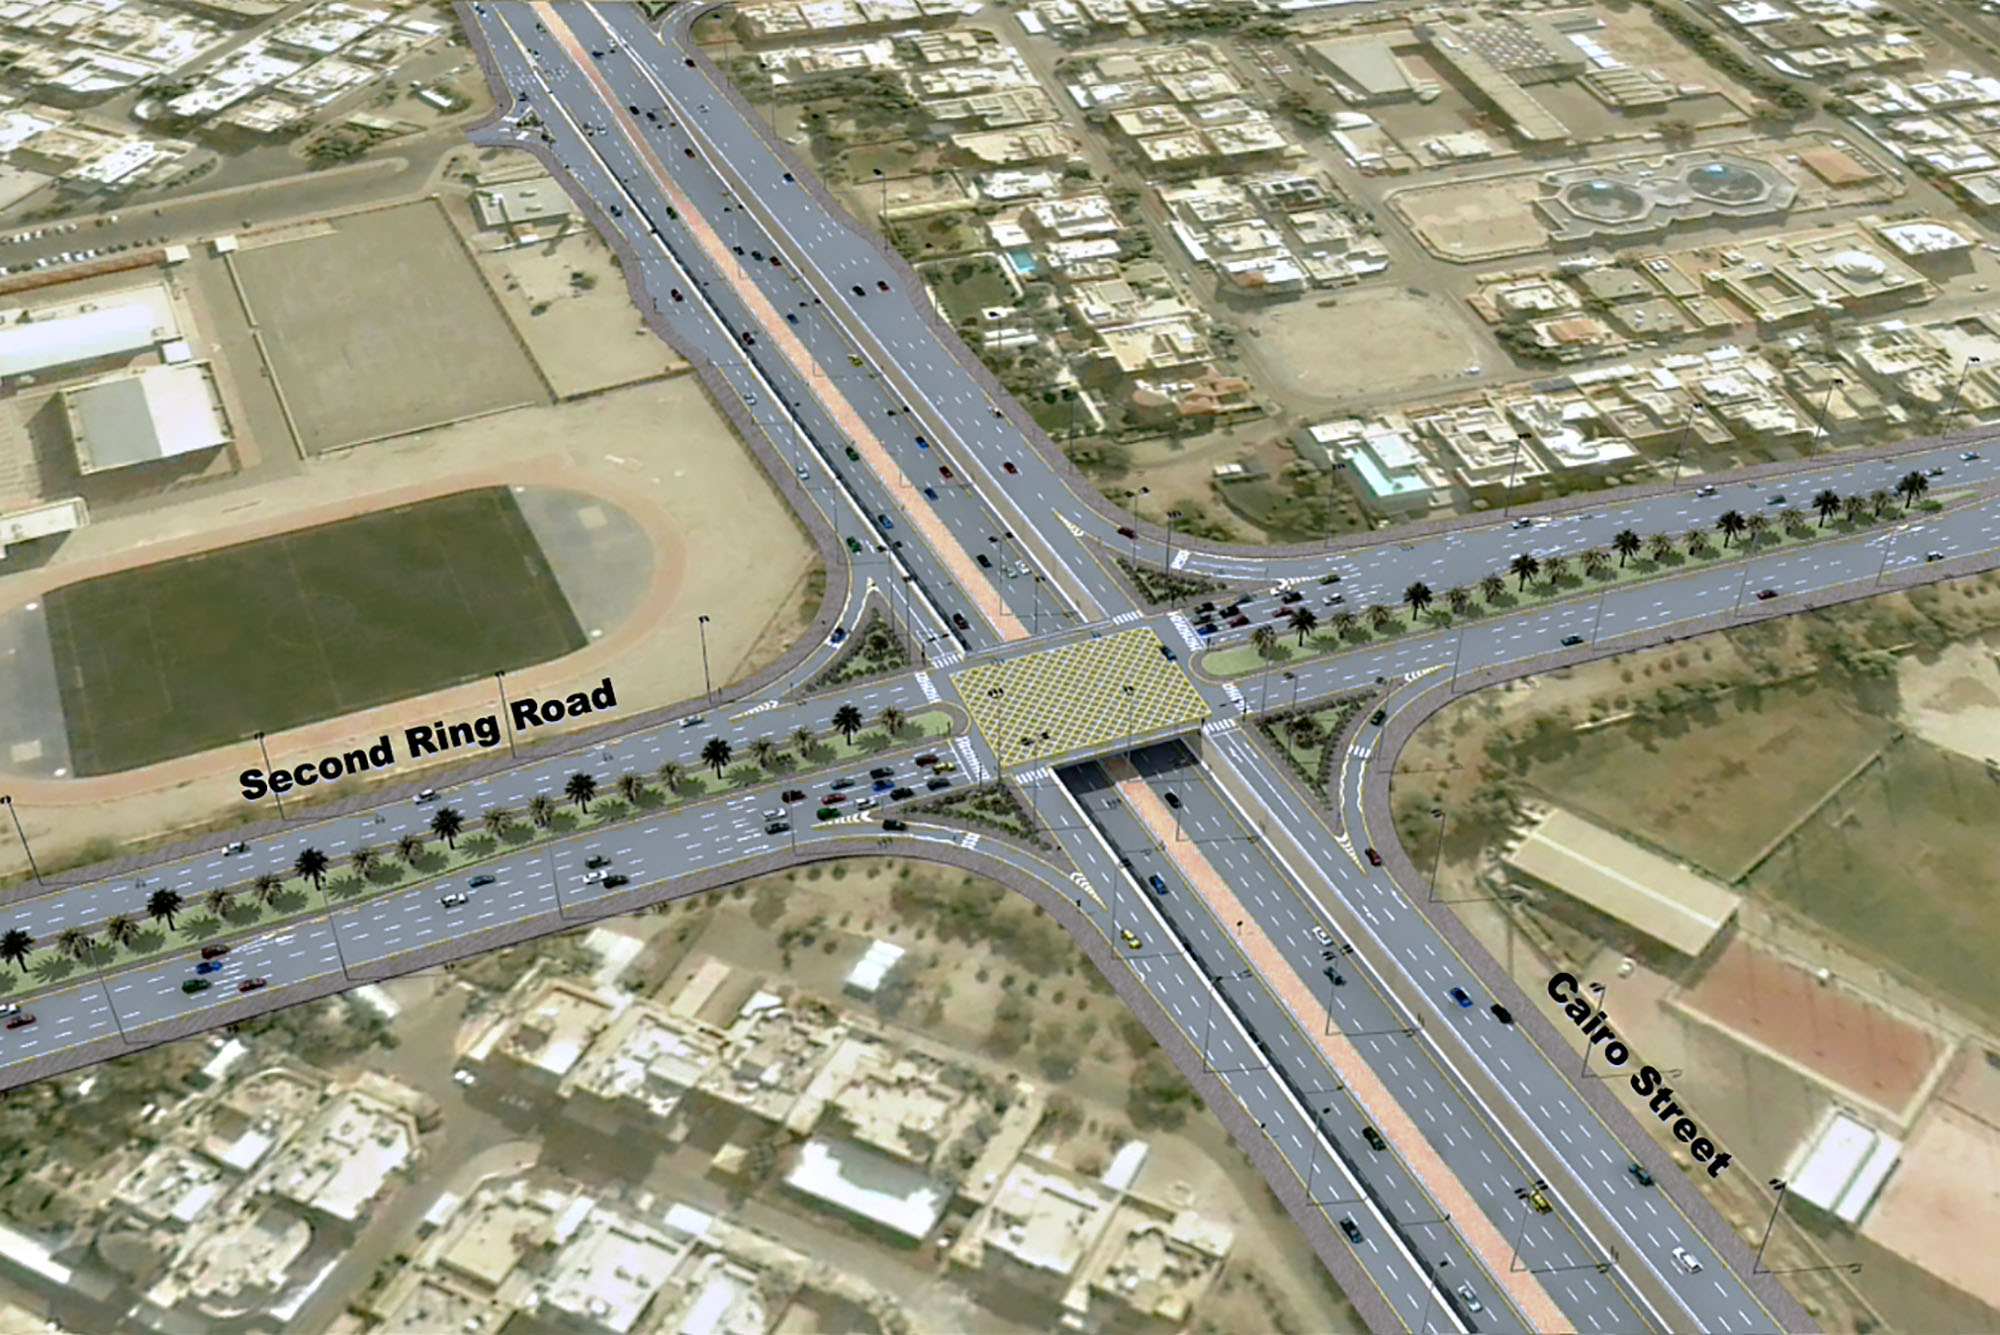 Upgrading of 2nd and 3rd ring road